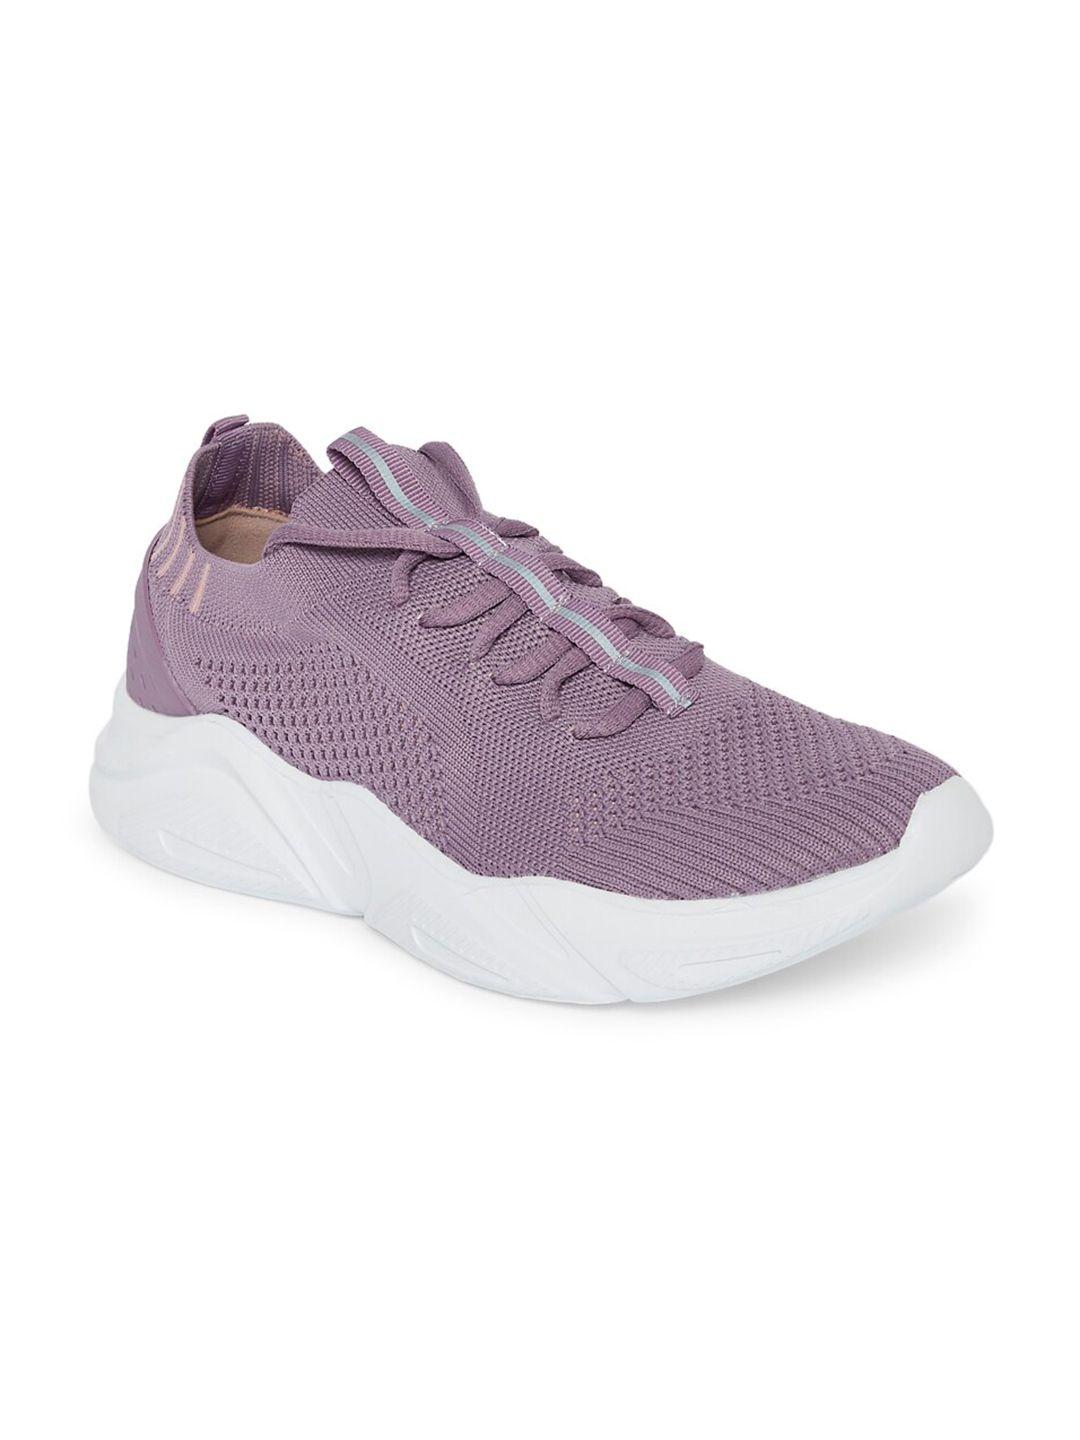 forever glam by pantaloons women purple running non-marking shoes